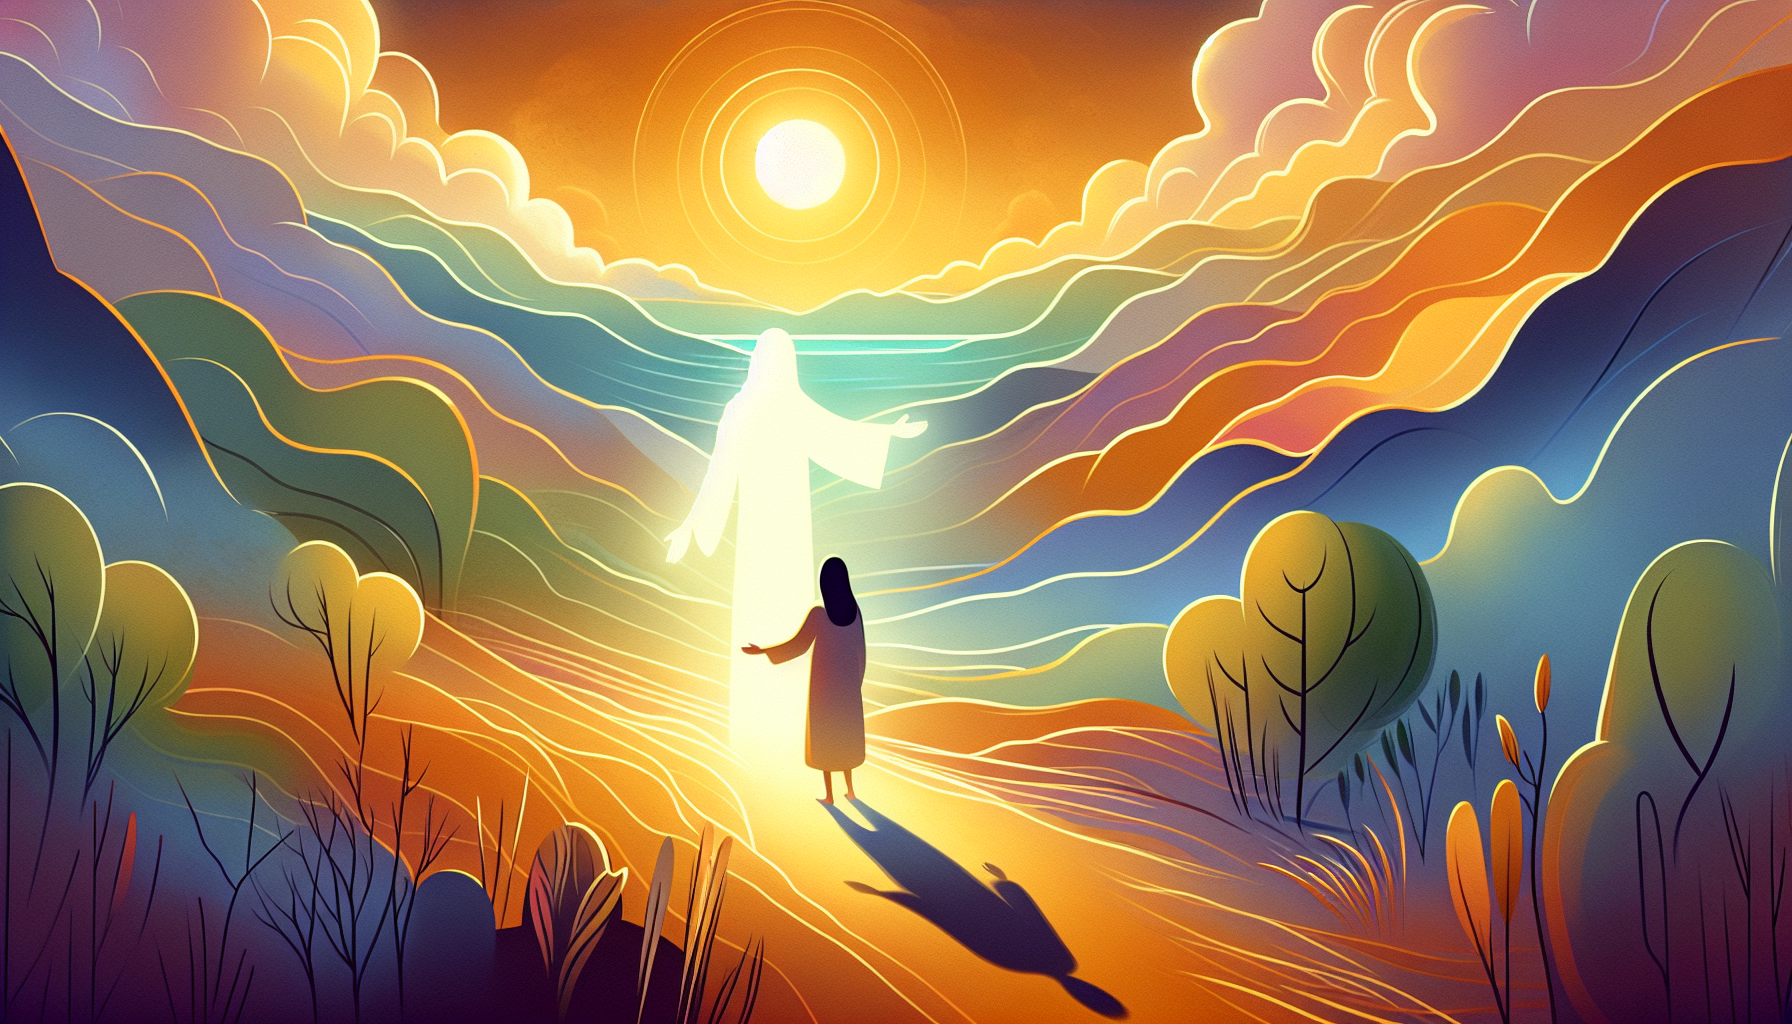 Visual representation of 1 John 4:18 - A serene landscape depicting a person surrounded by light and embracing a shadow, symbolizing fear leaving through love, with gentle and calming colors, in a bea